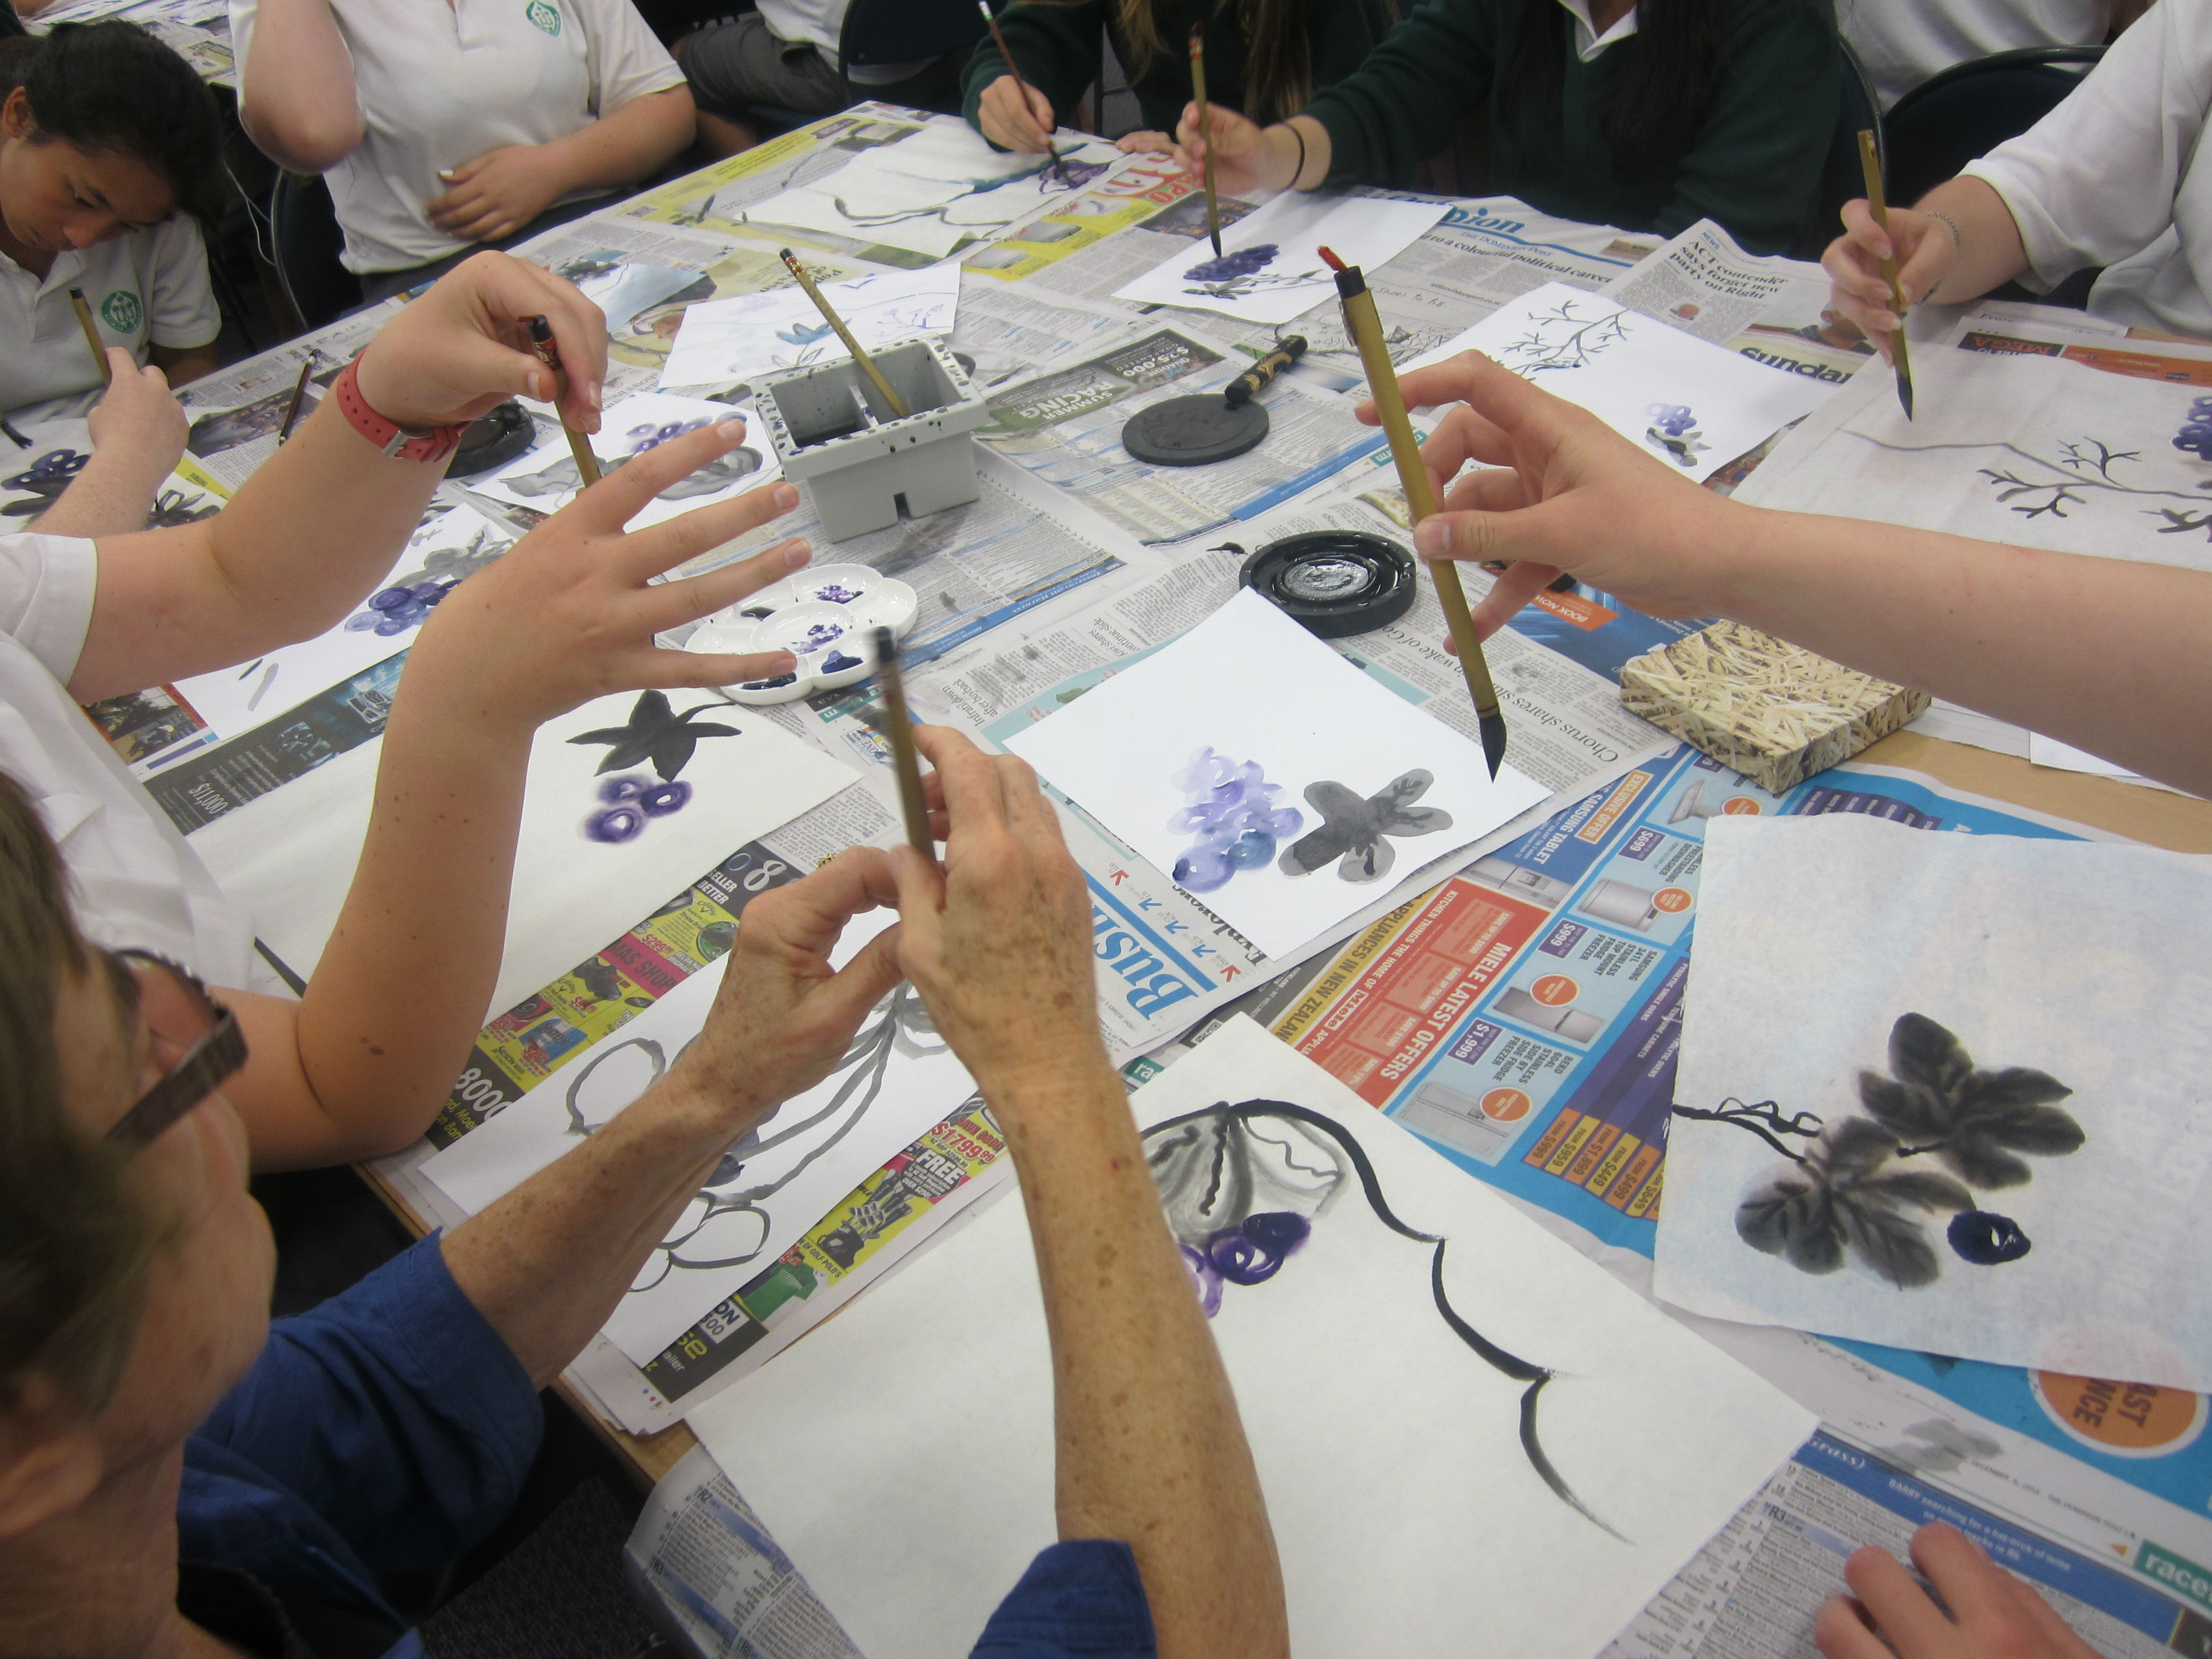 Wanganui High School's students learning to hold the paint brush before painting